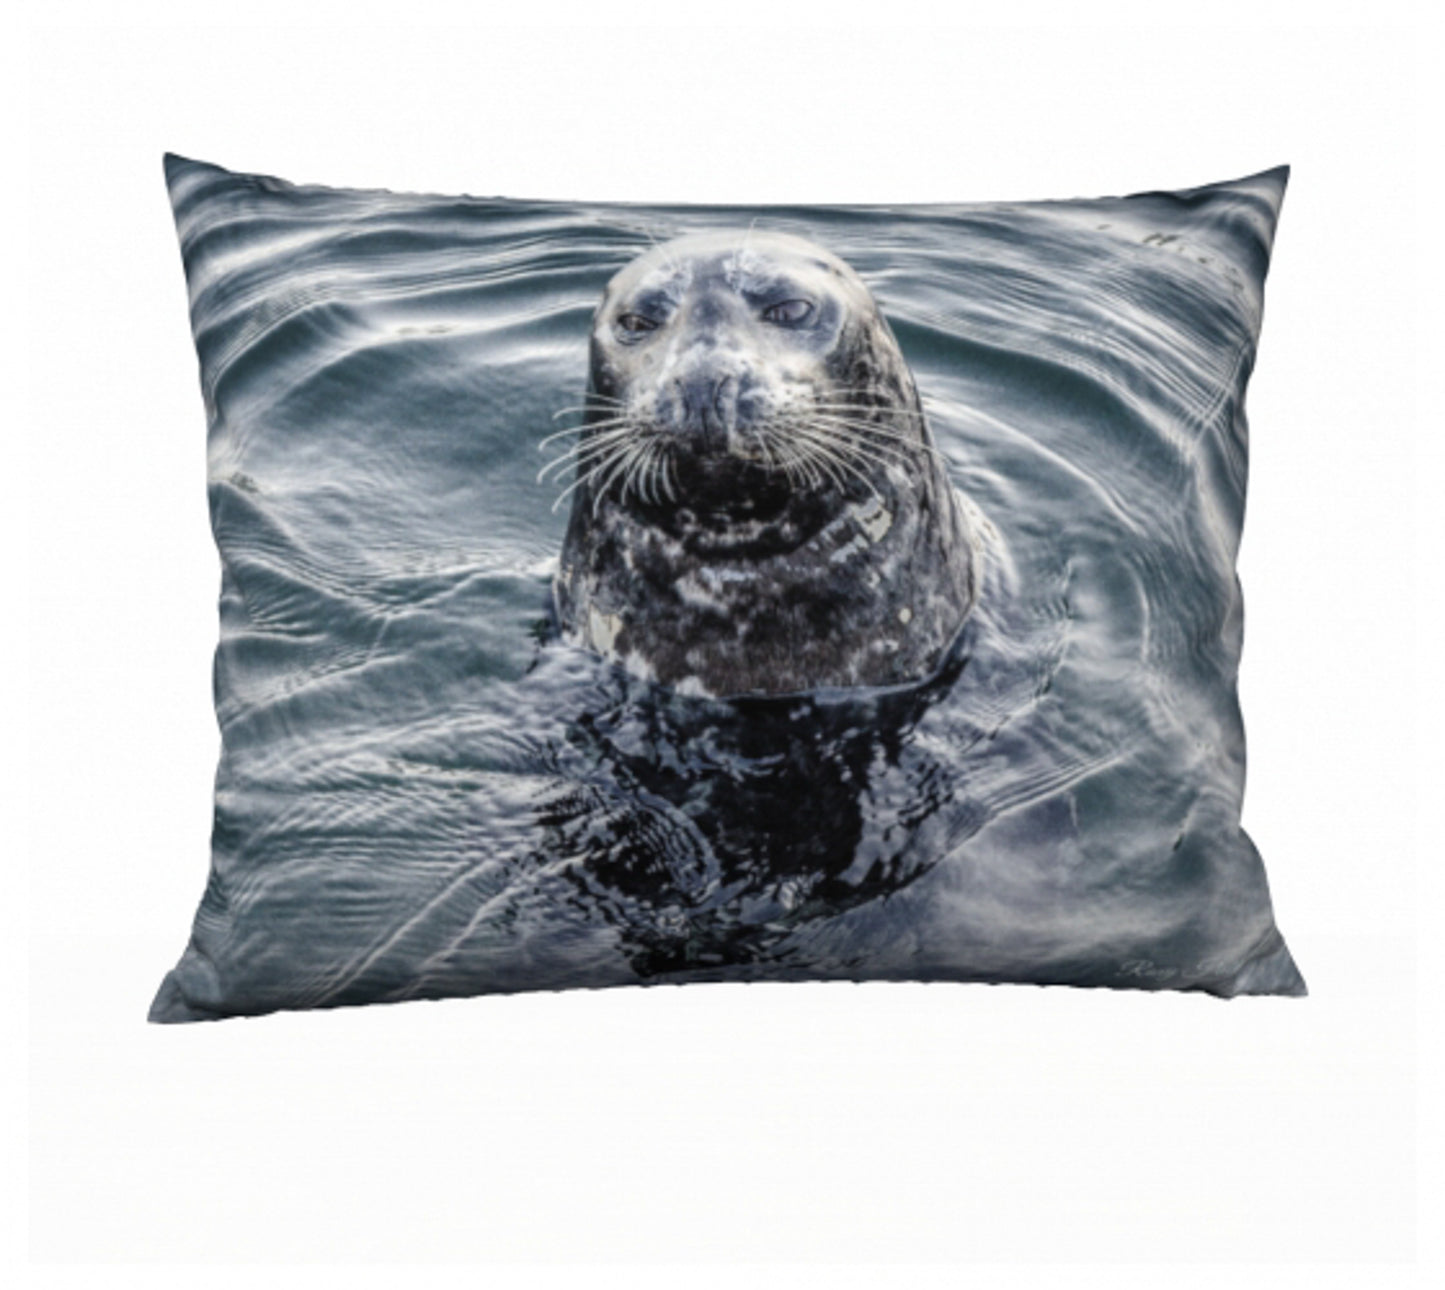 I Love Lucy Seal Vancouver Island 26" x 20" Pillow Case